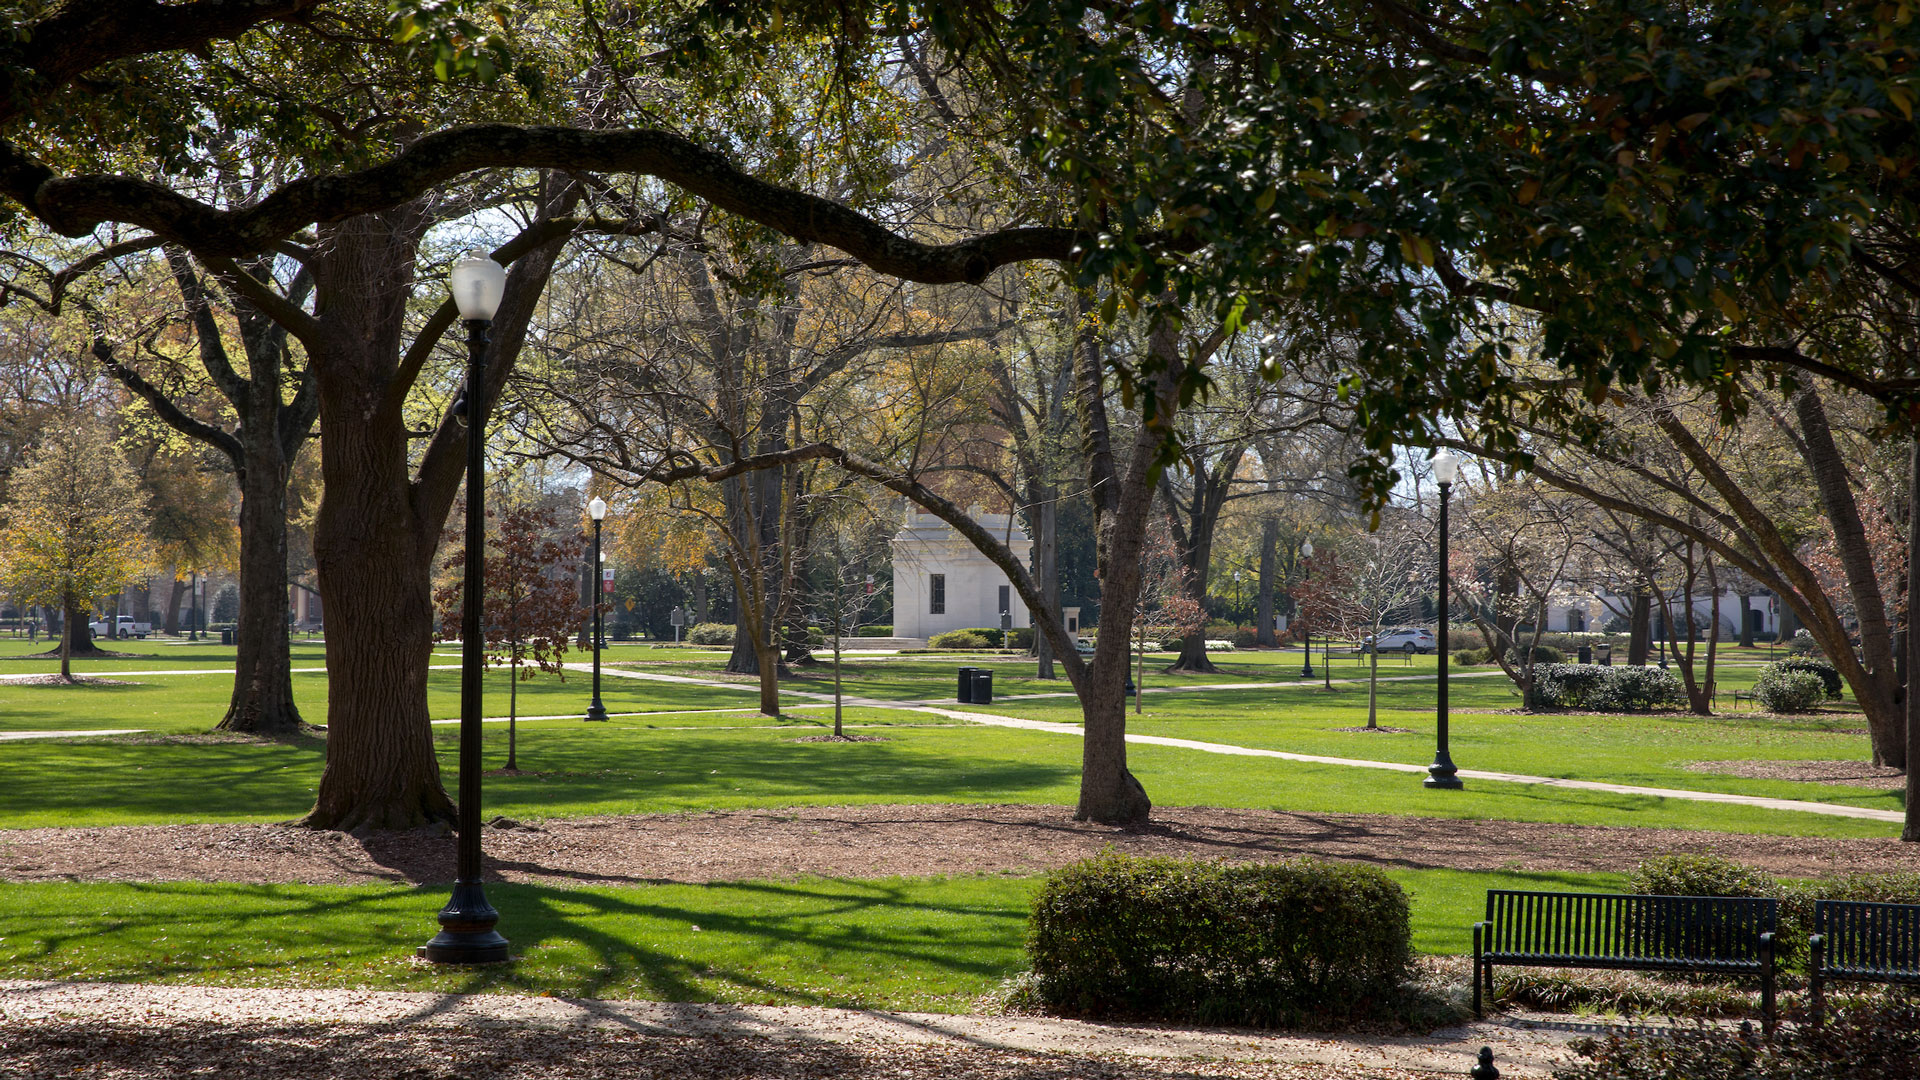 photograph of the Quad looking peaceful and empty of people through the trees